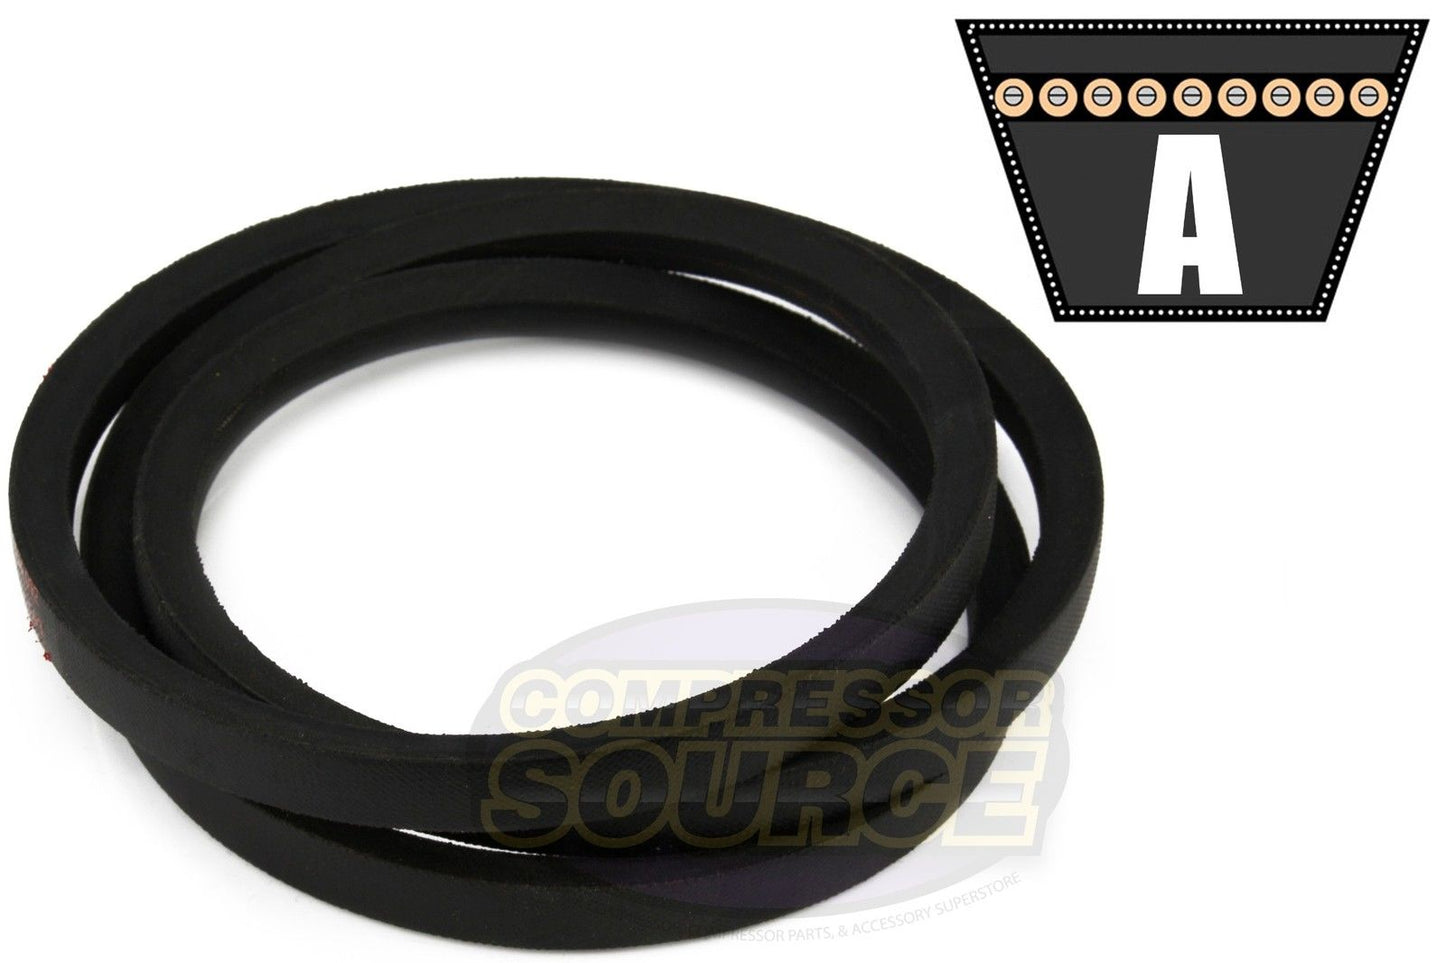 A67 Belt Industrial & Lawn Mower 1/2" x 69" V Belt 4L690 Replacement Quality